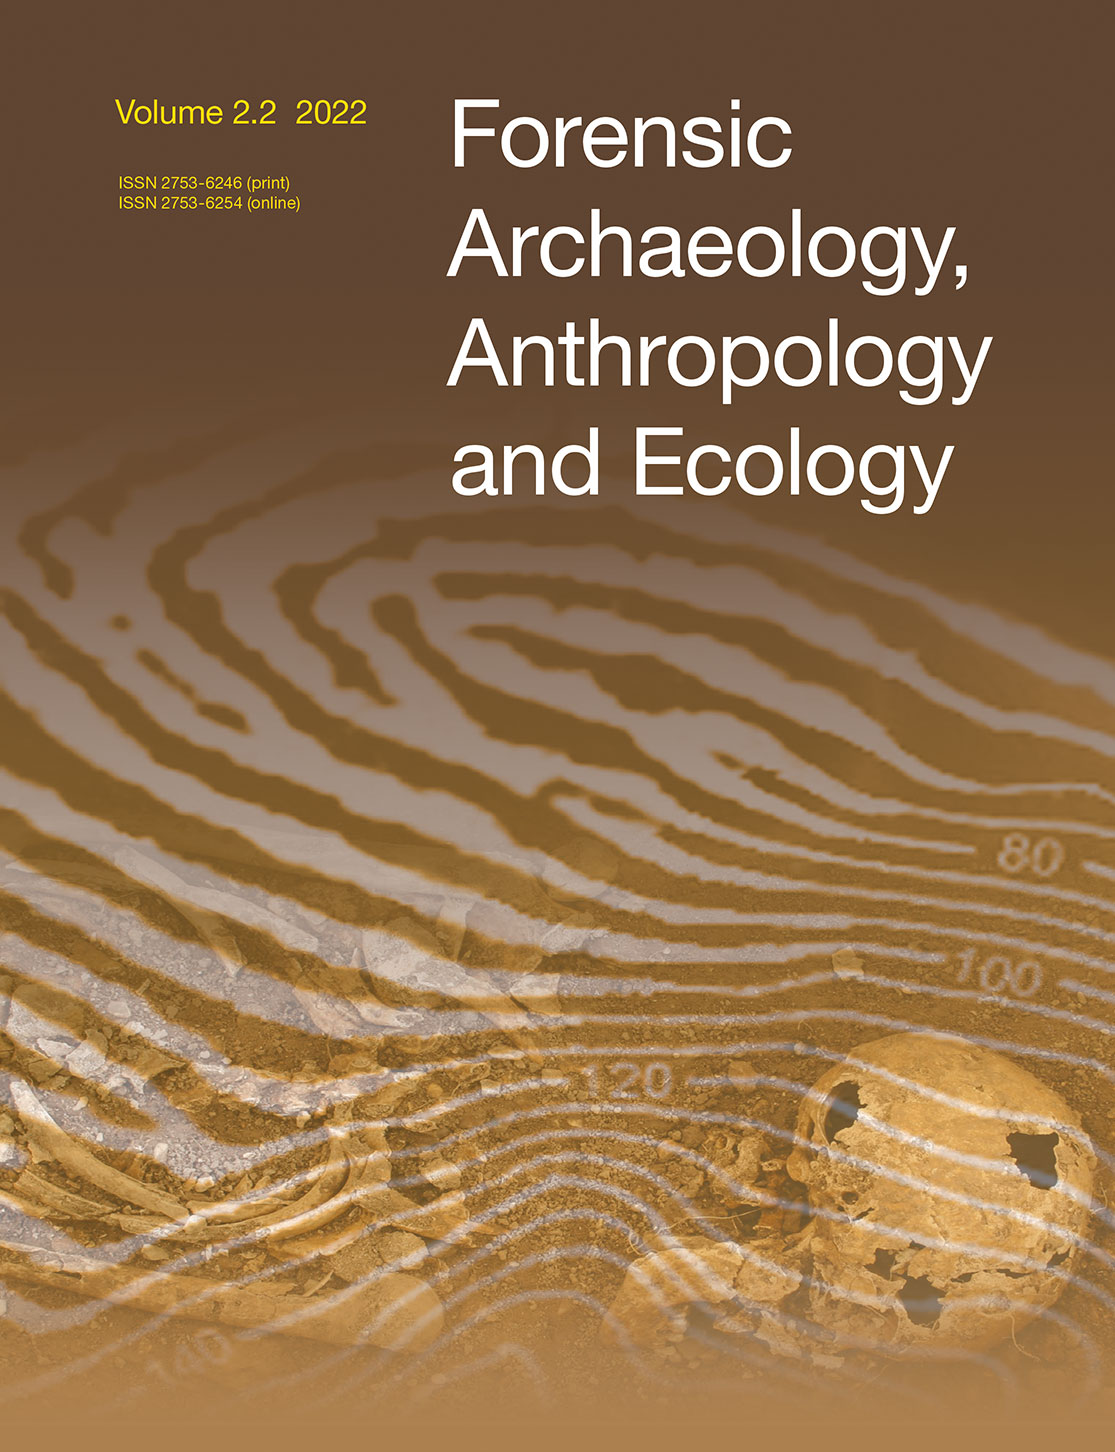 Forensic Archaeology, Anthropology and Ecology